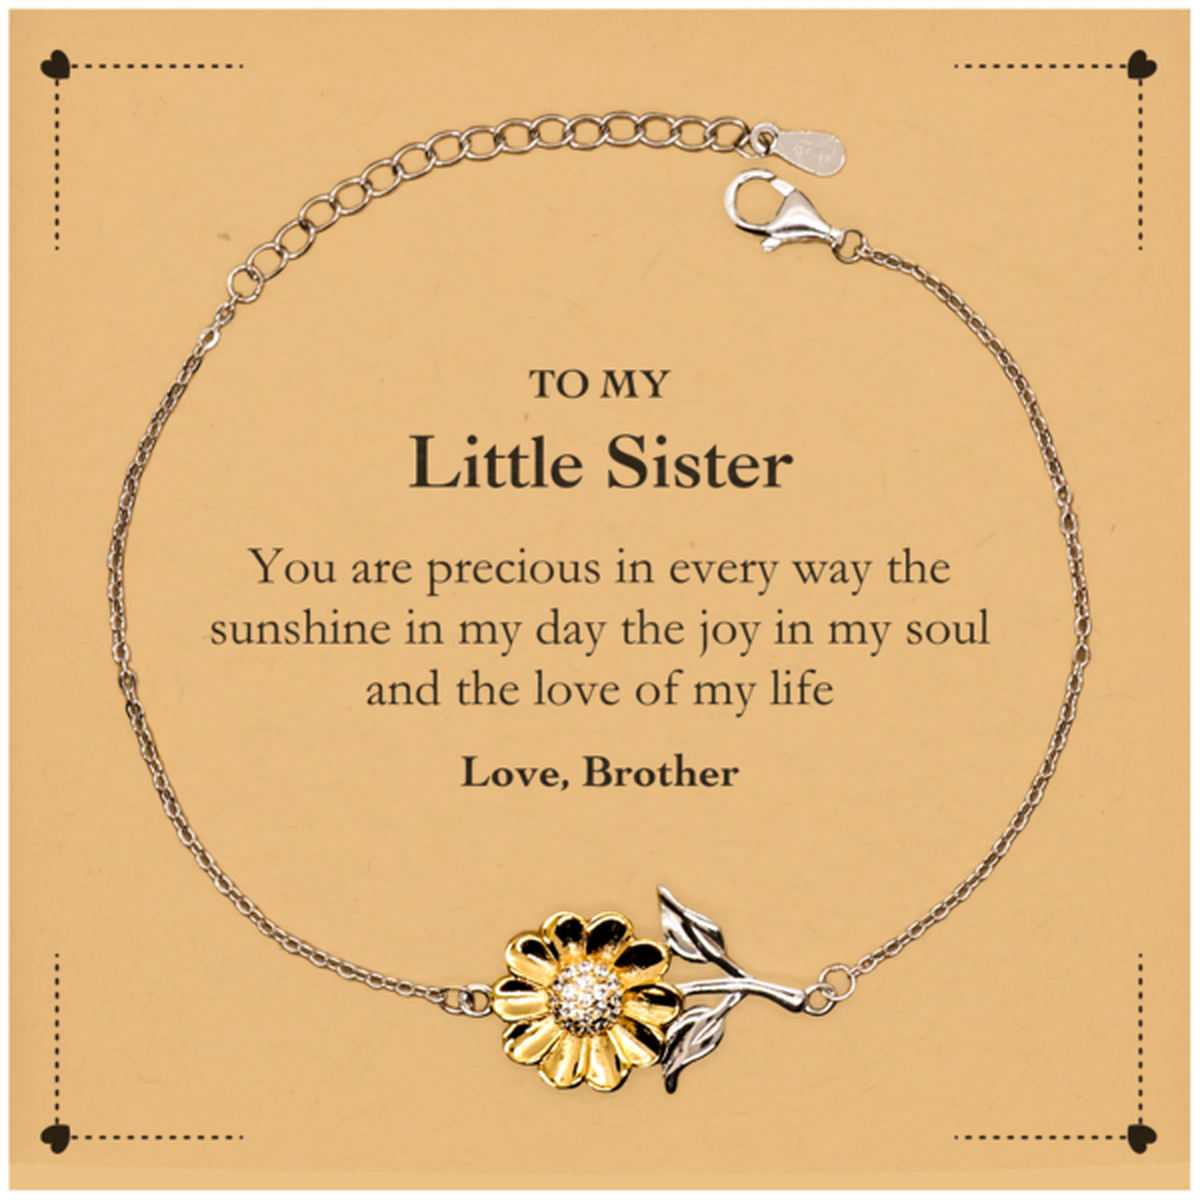 Graduation Gifts for Little Sister Sunflower Bracelet Present from Brother, Christmas Little Sister Birthday Gifts Little Sister You are precious in every way the sunshine in my day. Love, Brother